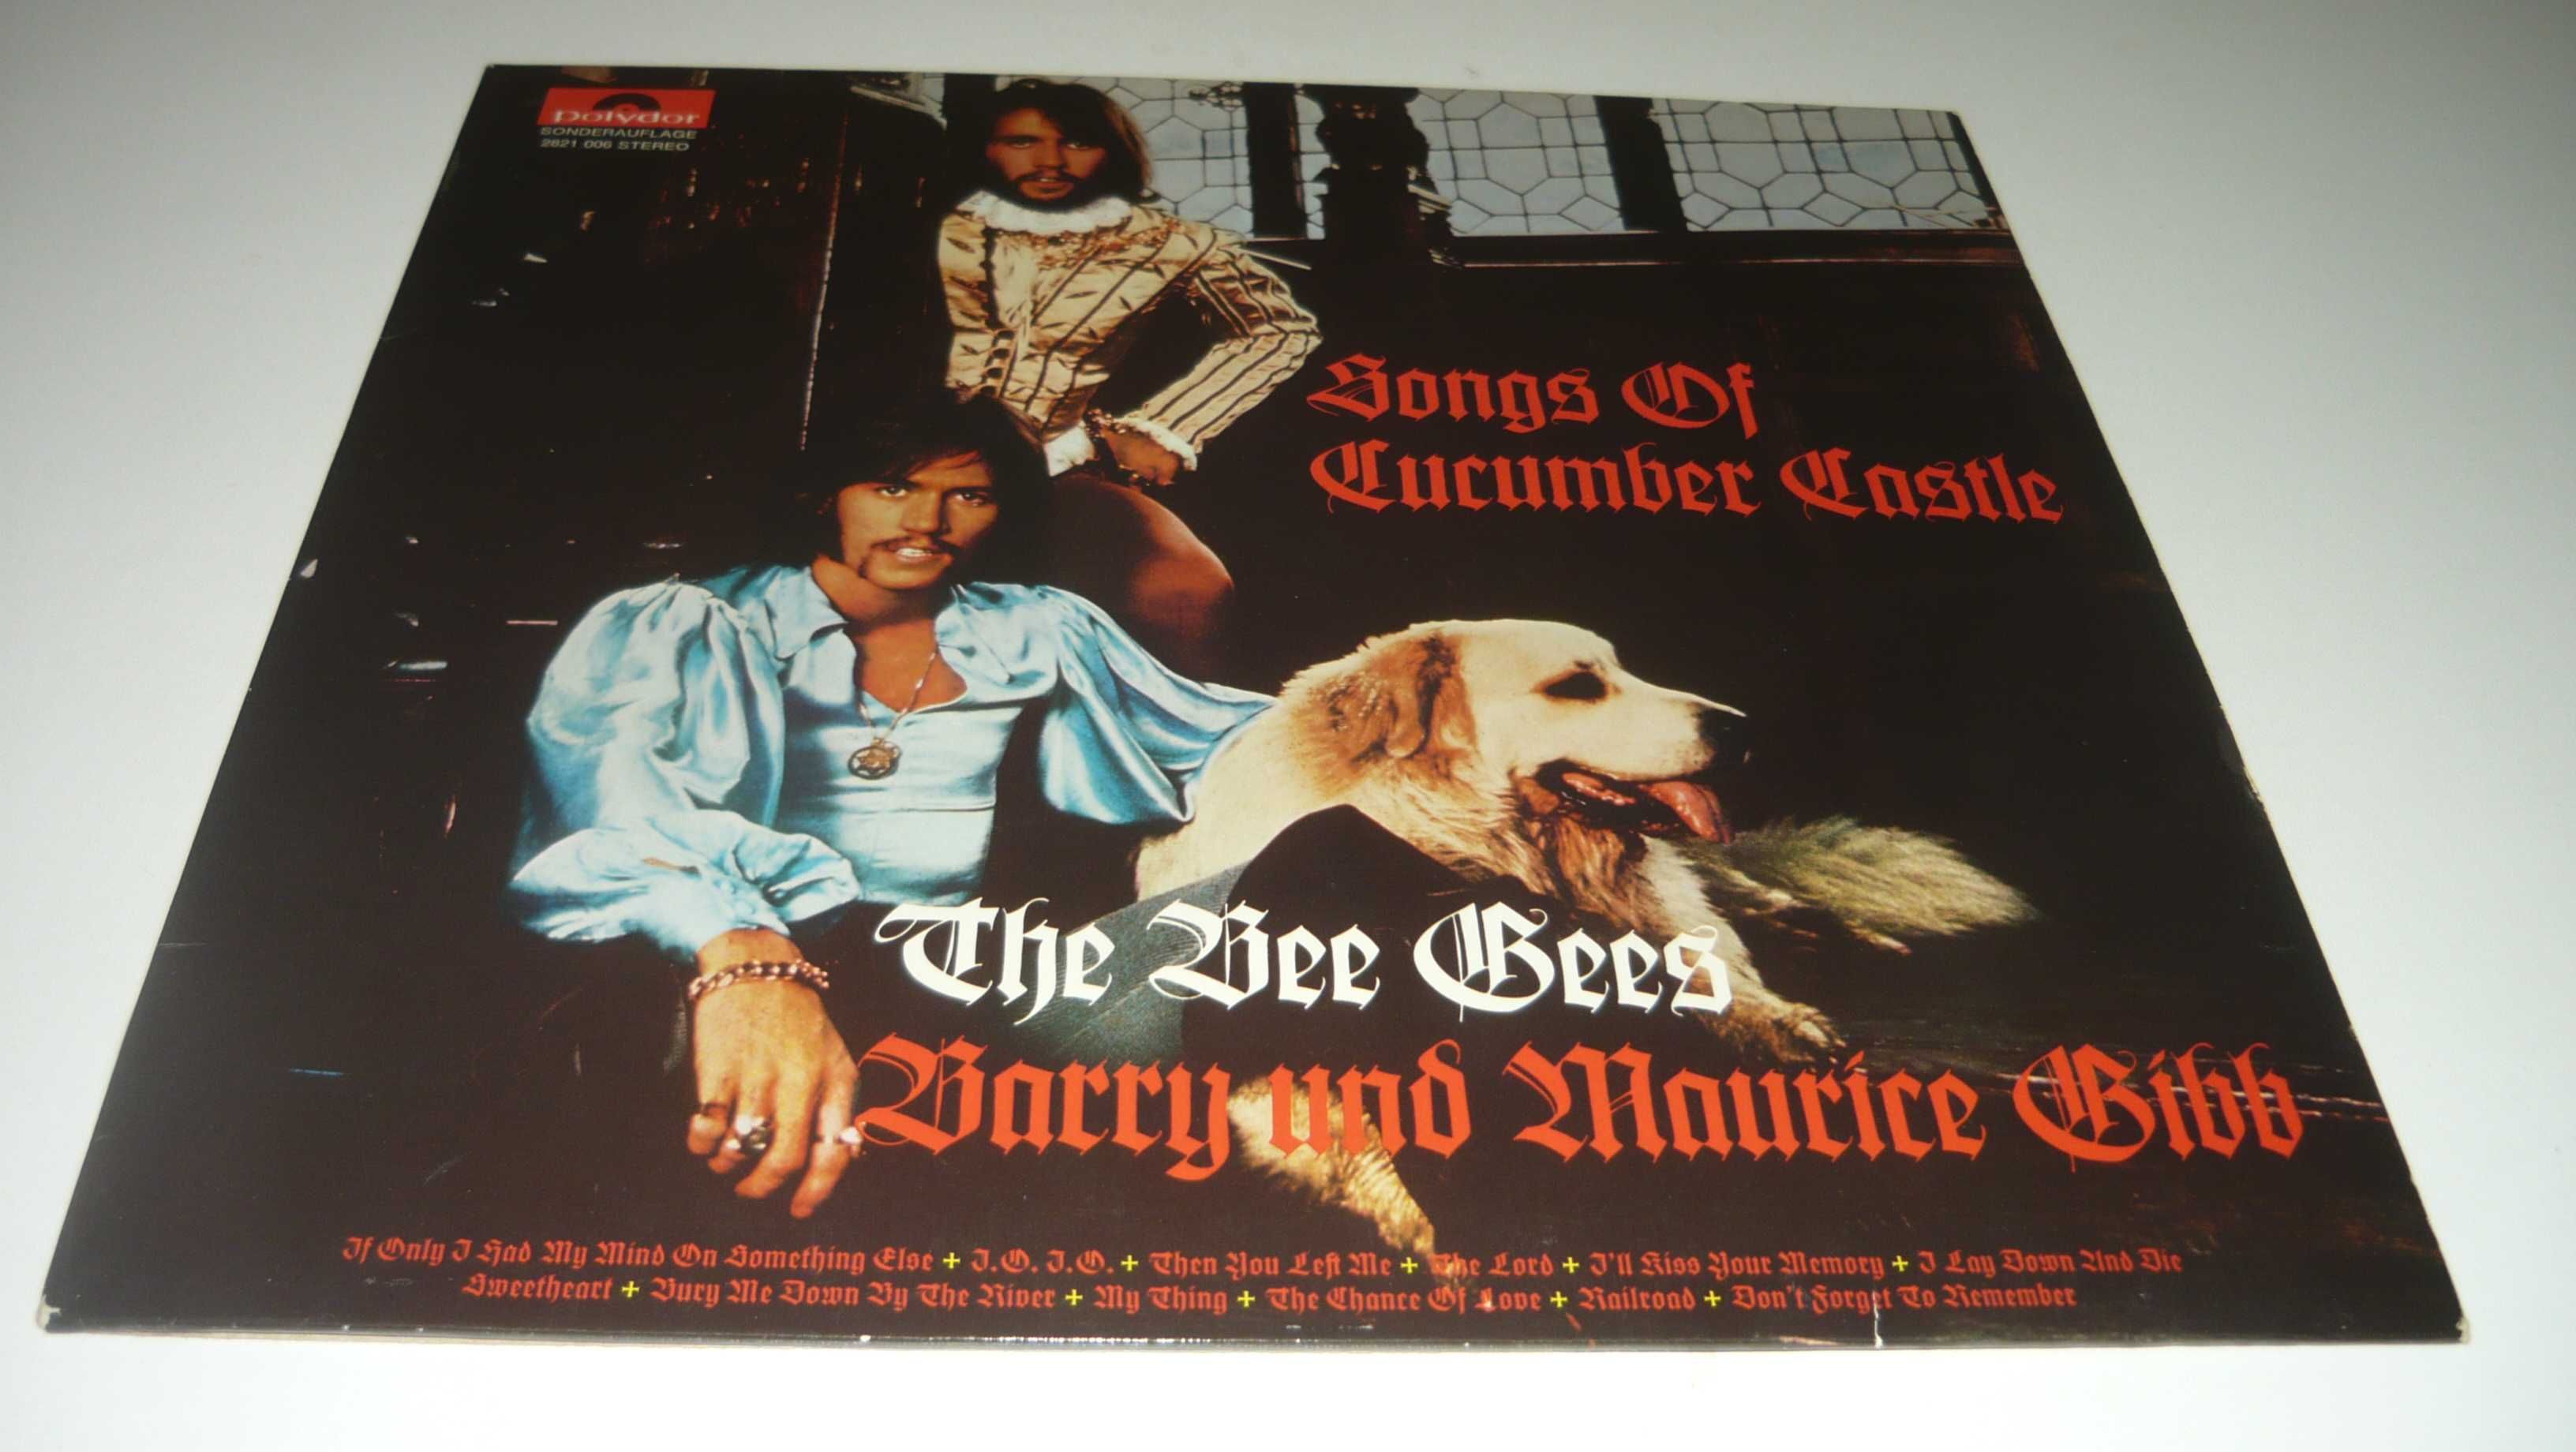 The Bee Gees Songs of Cucumber Castle LP